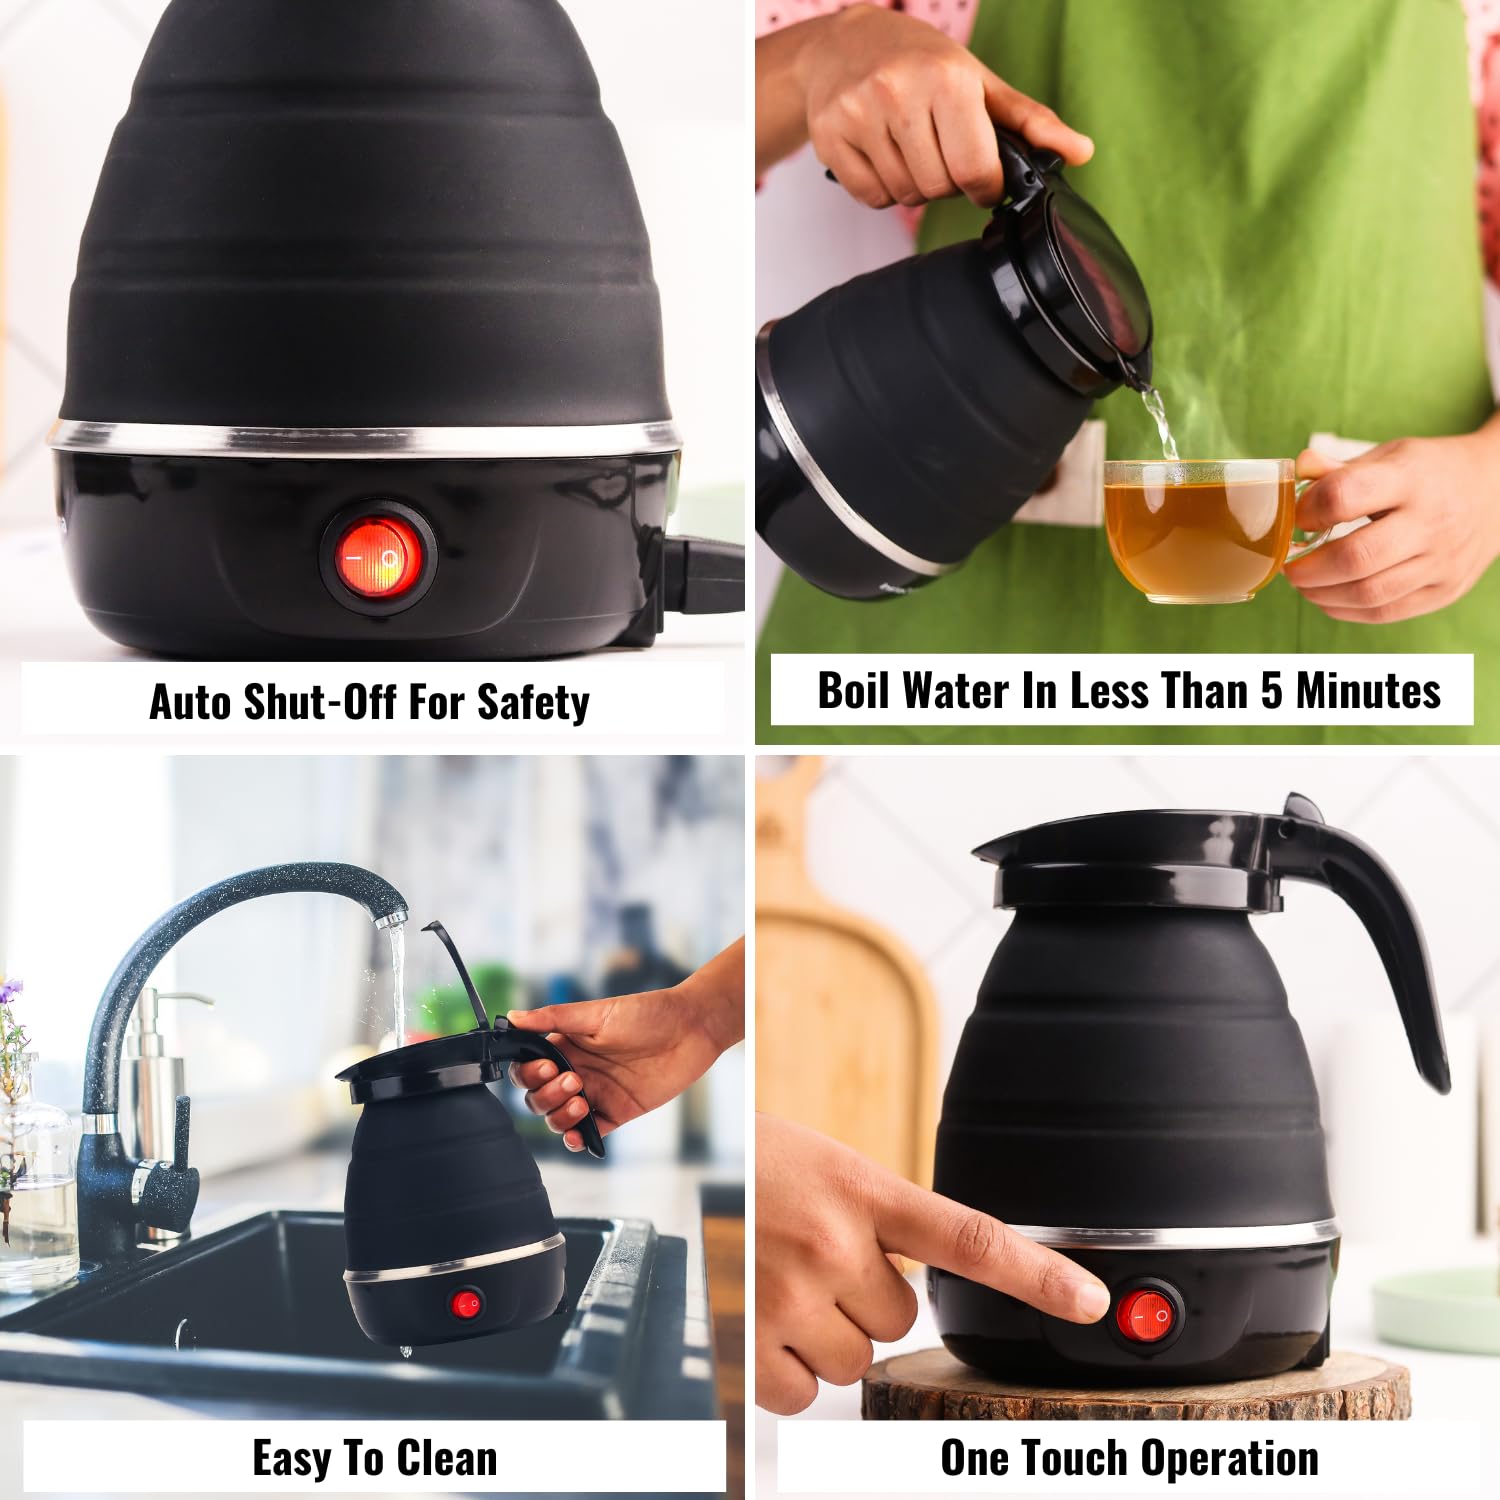 InstaCuppa Portable Electric Kettle: The Perfect Travel Companion